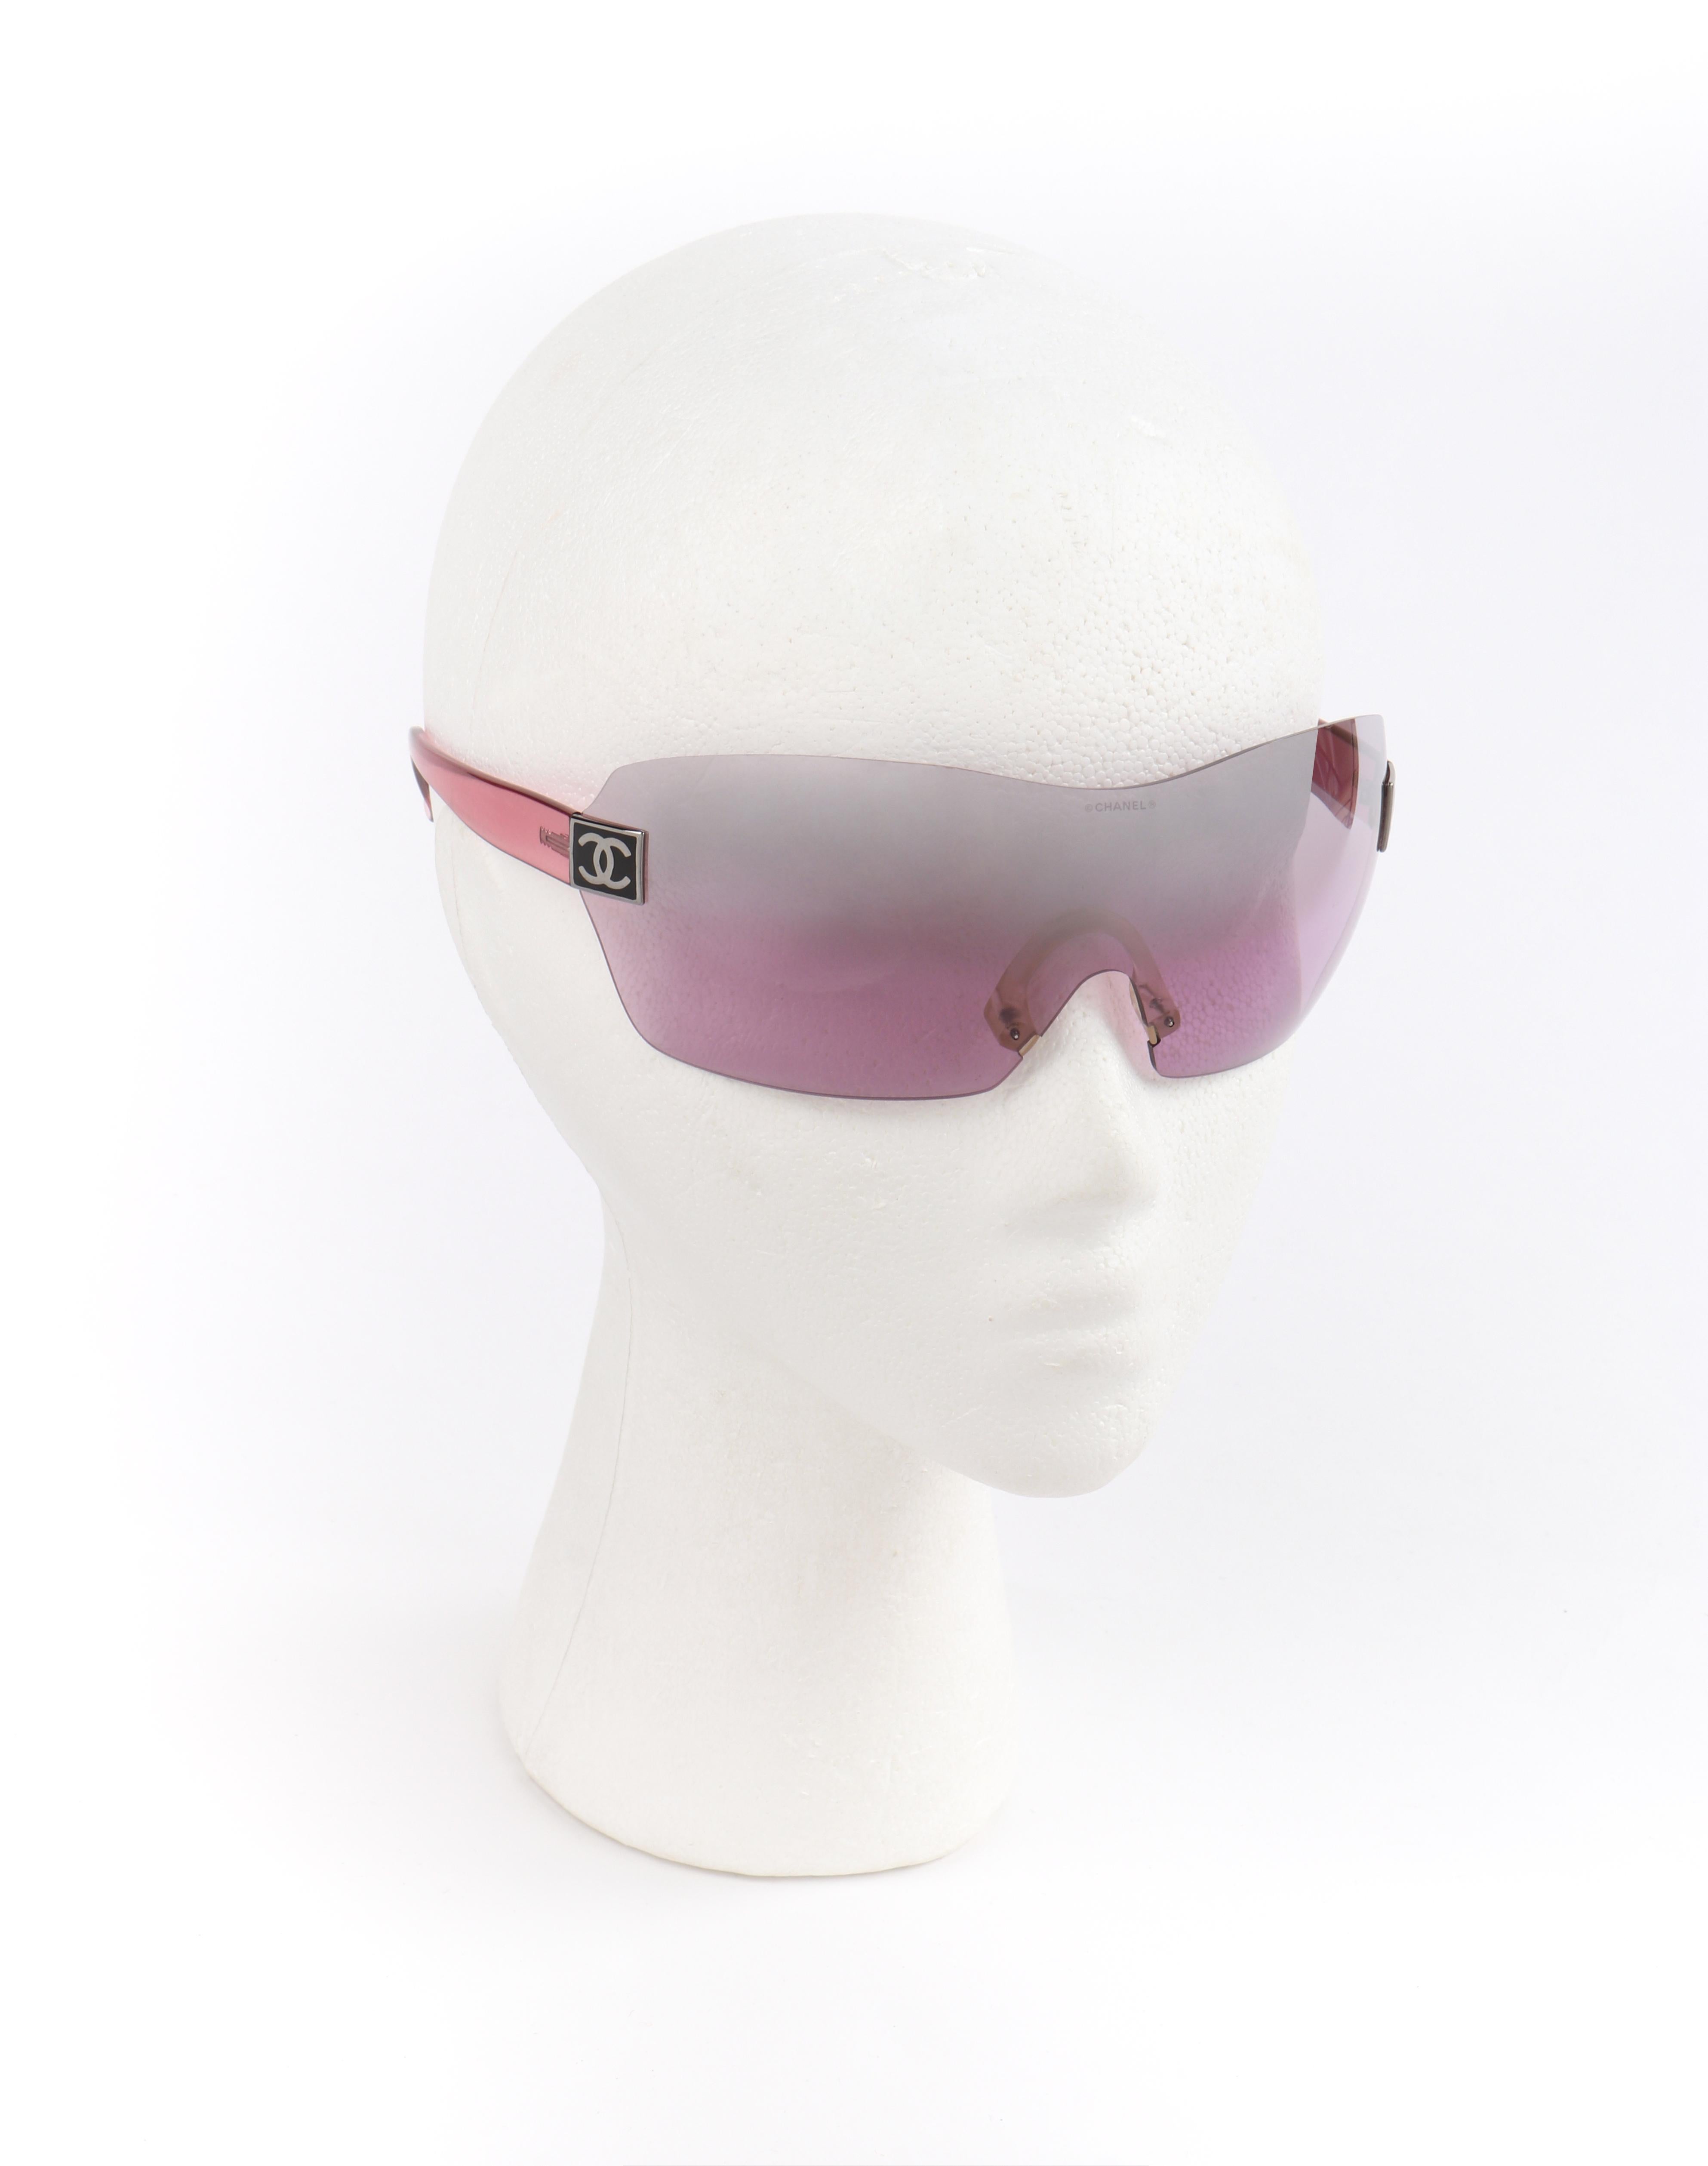 CHANEL c.2000’s Pink Translucent CC Logo Shield Rimless Sunglasses 4111 w/Box
 
Brand/Manufacturer: Chanel
Circa: 2000’s
Designer: Karl Lagerfeld
Style: Rimless shield sunglasses
Color(s): Shades of pink, black, silver
Lined: No
Unmarked Fabric